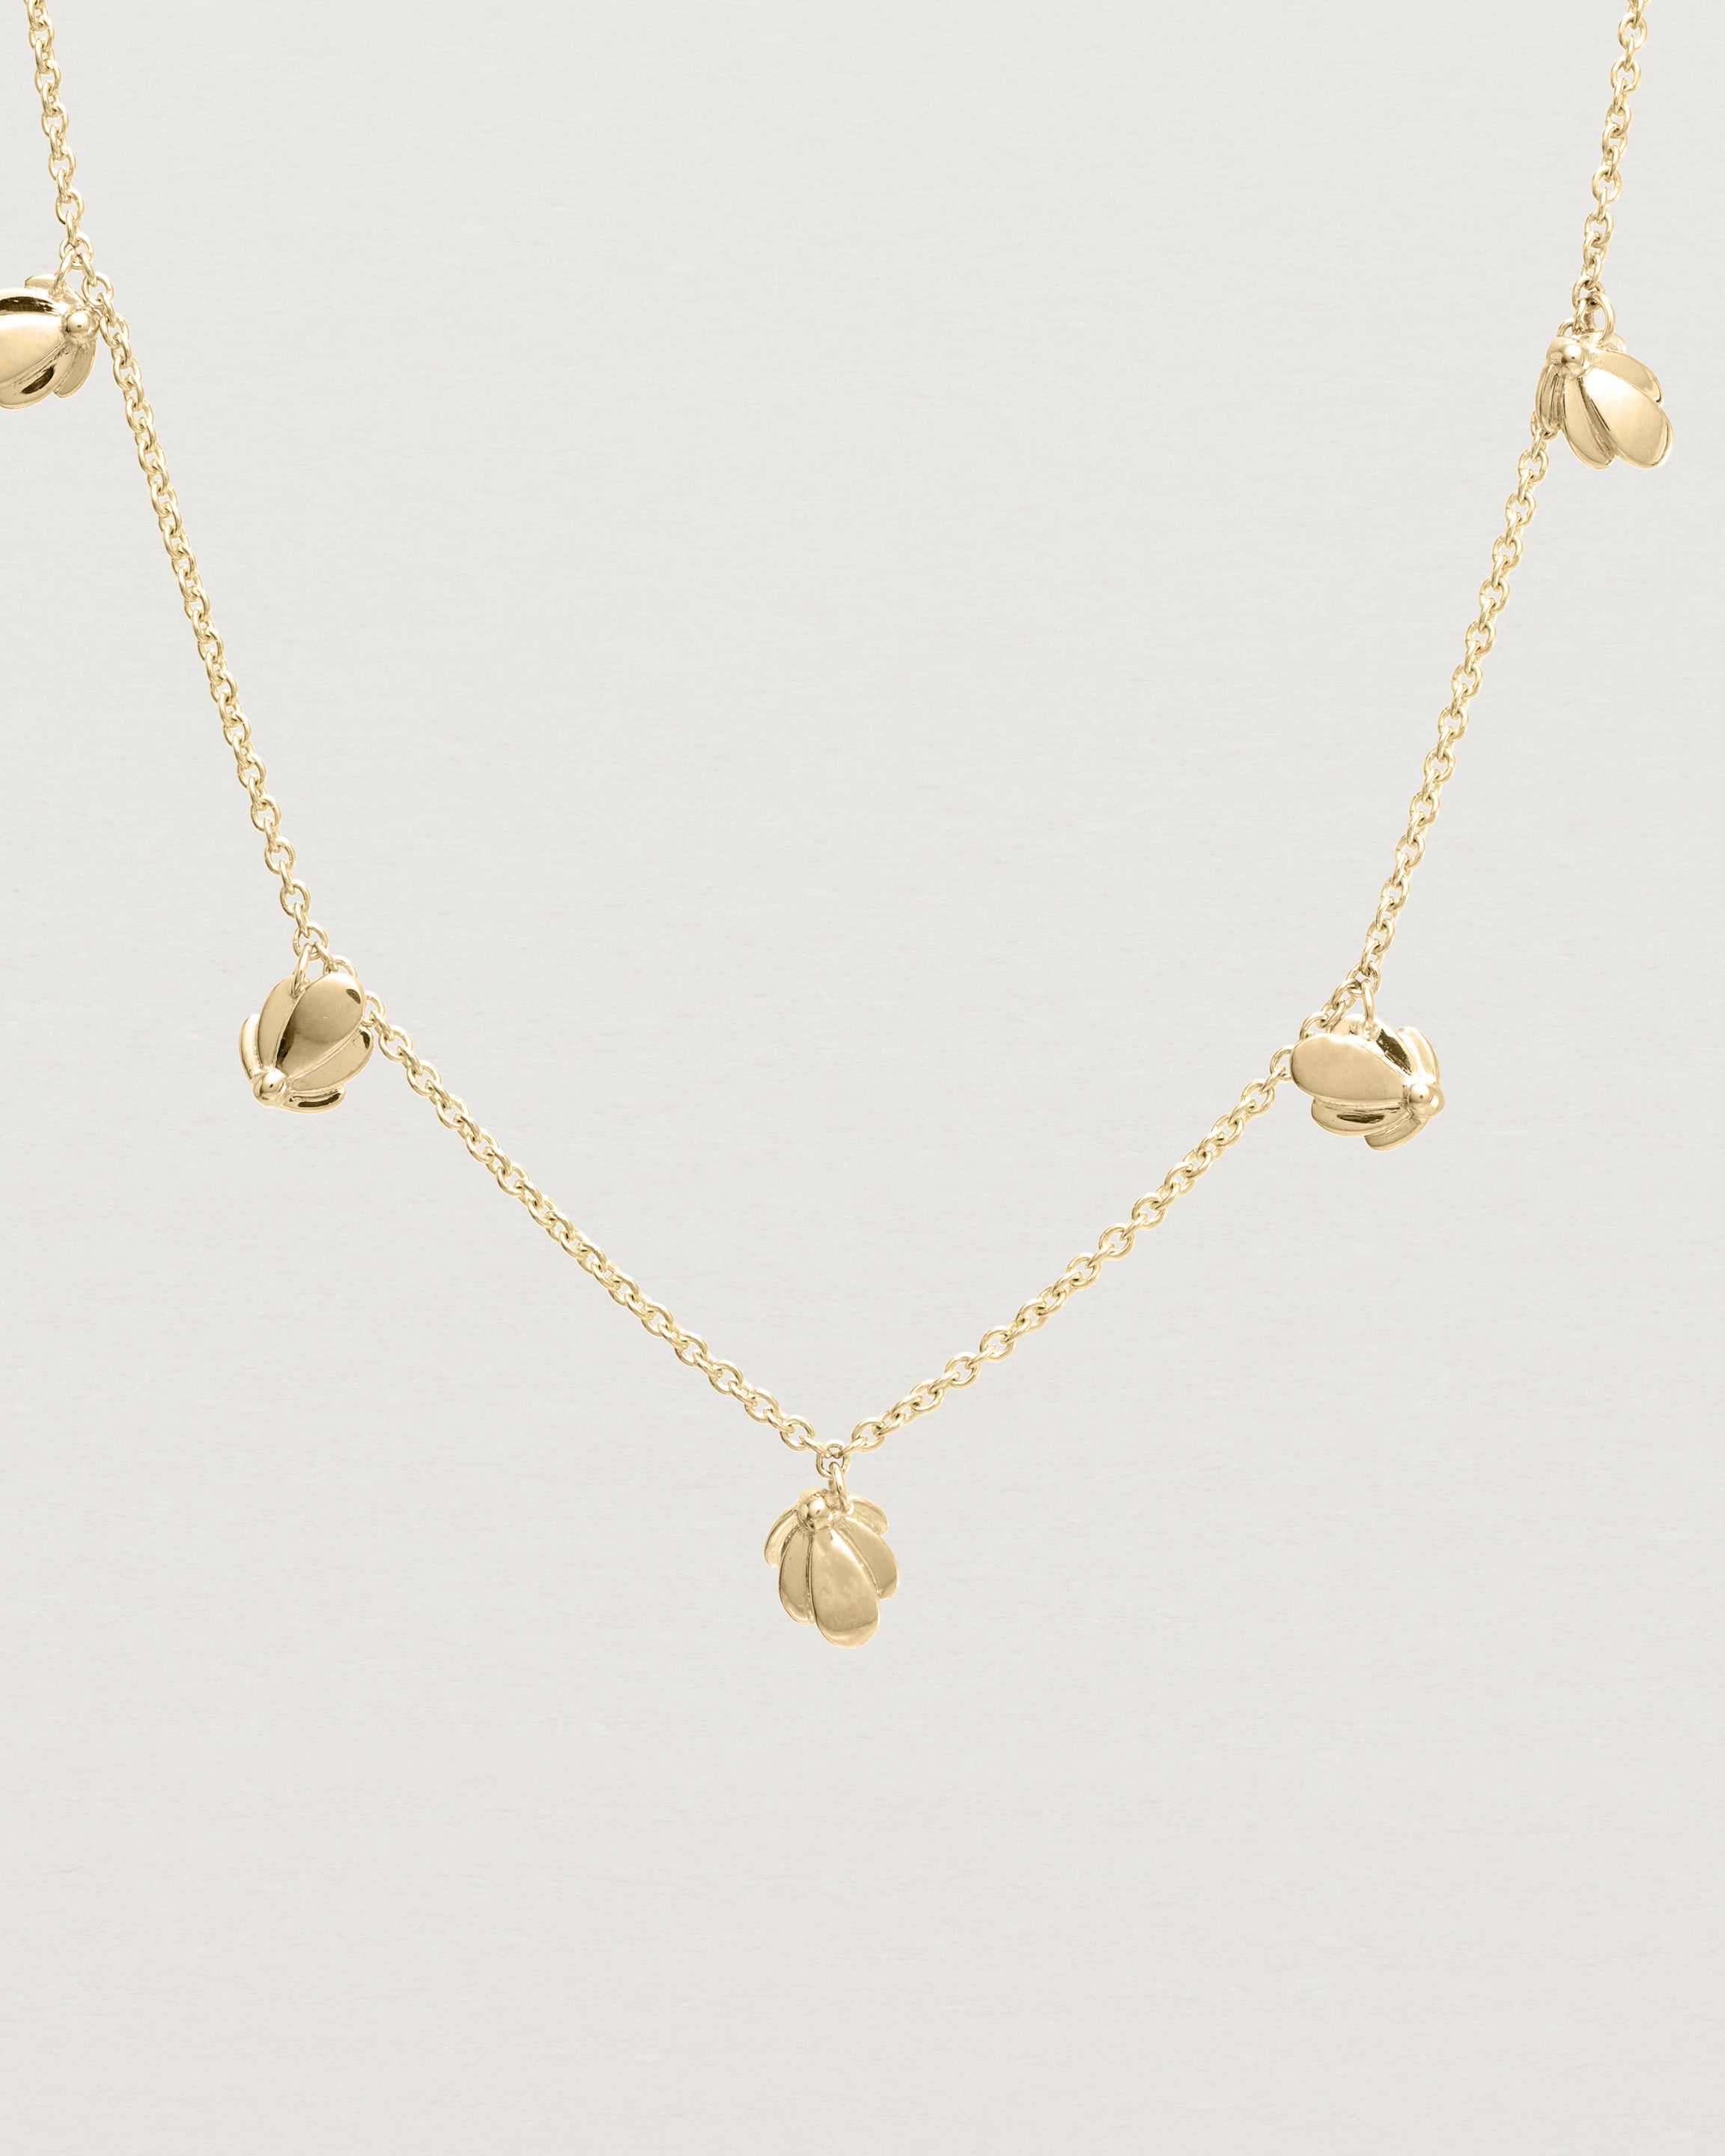 Close up view of the Aeris Charm Necklace in yellow gold.